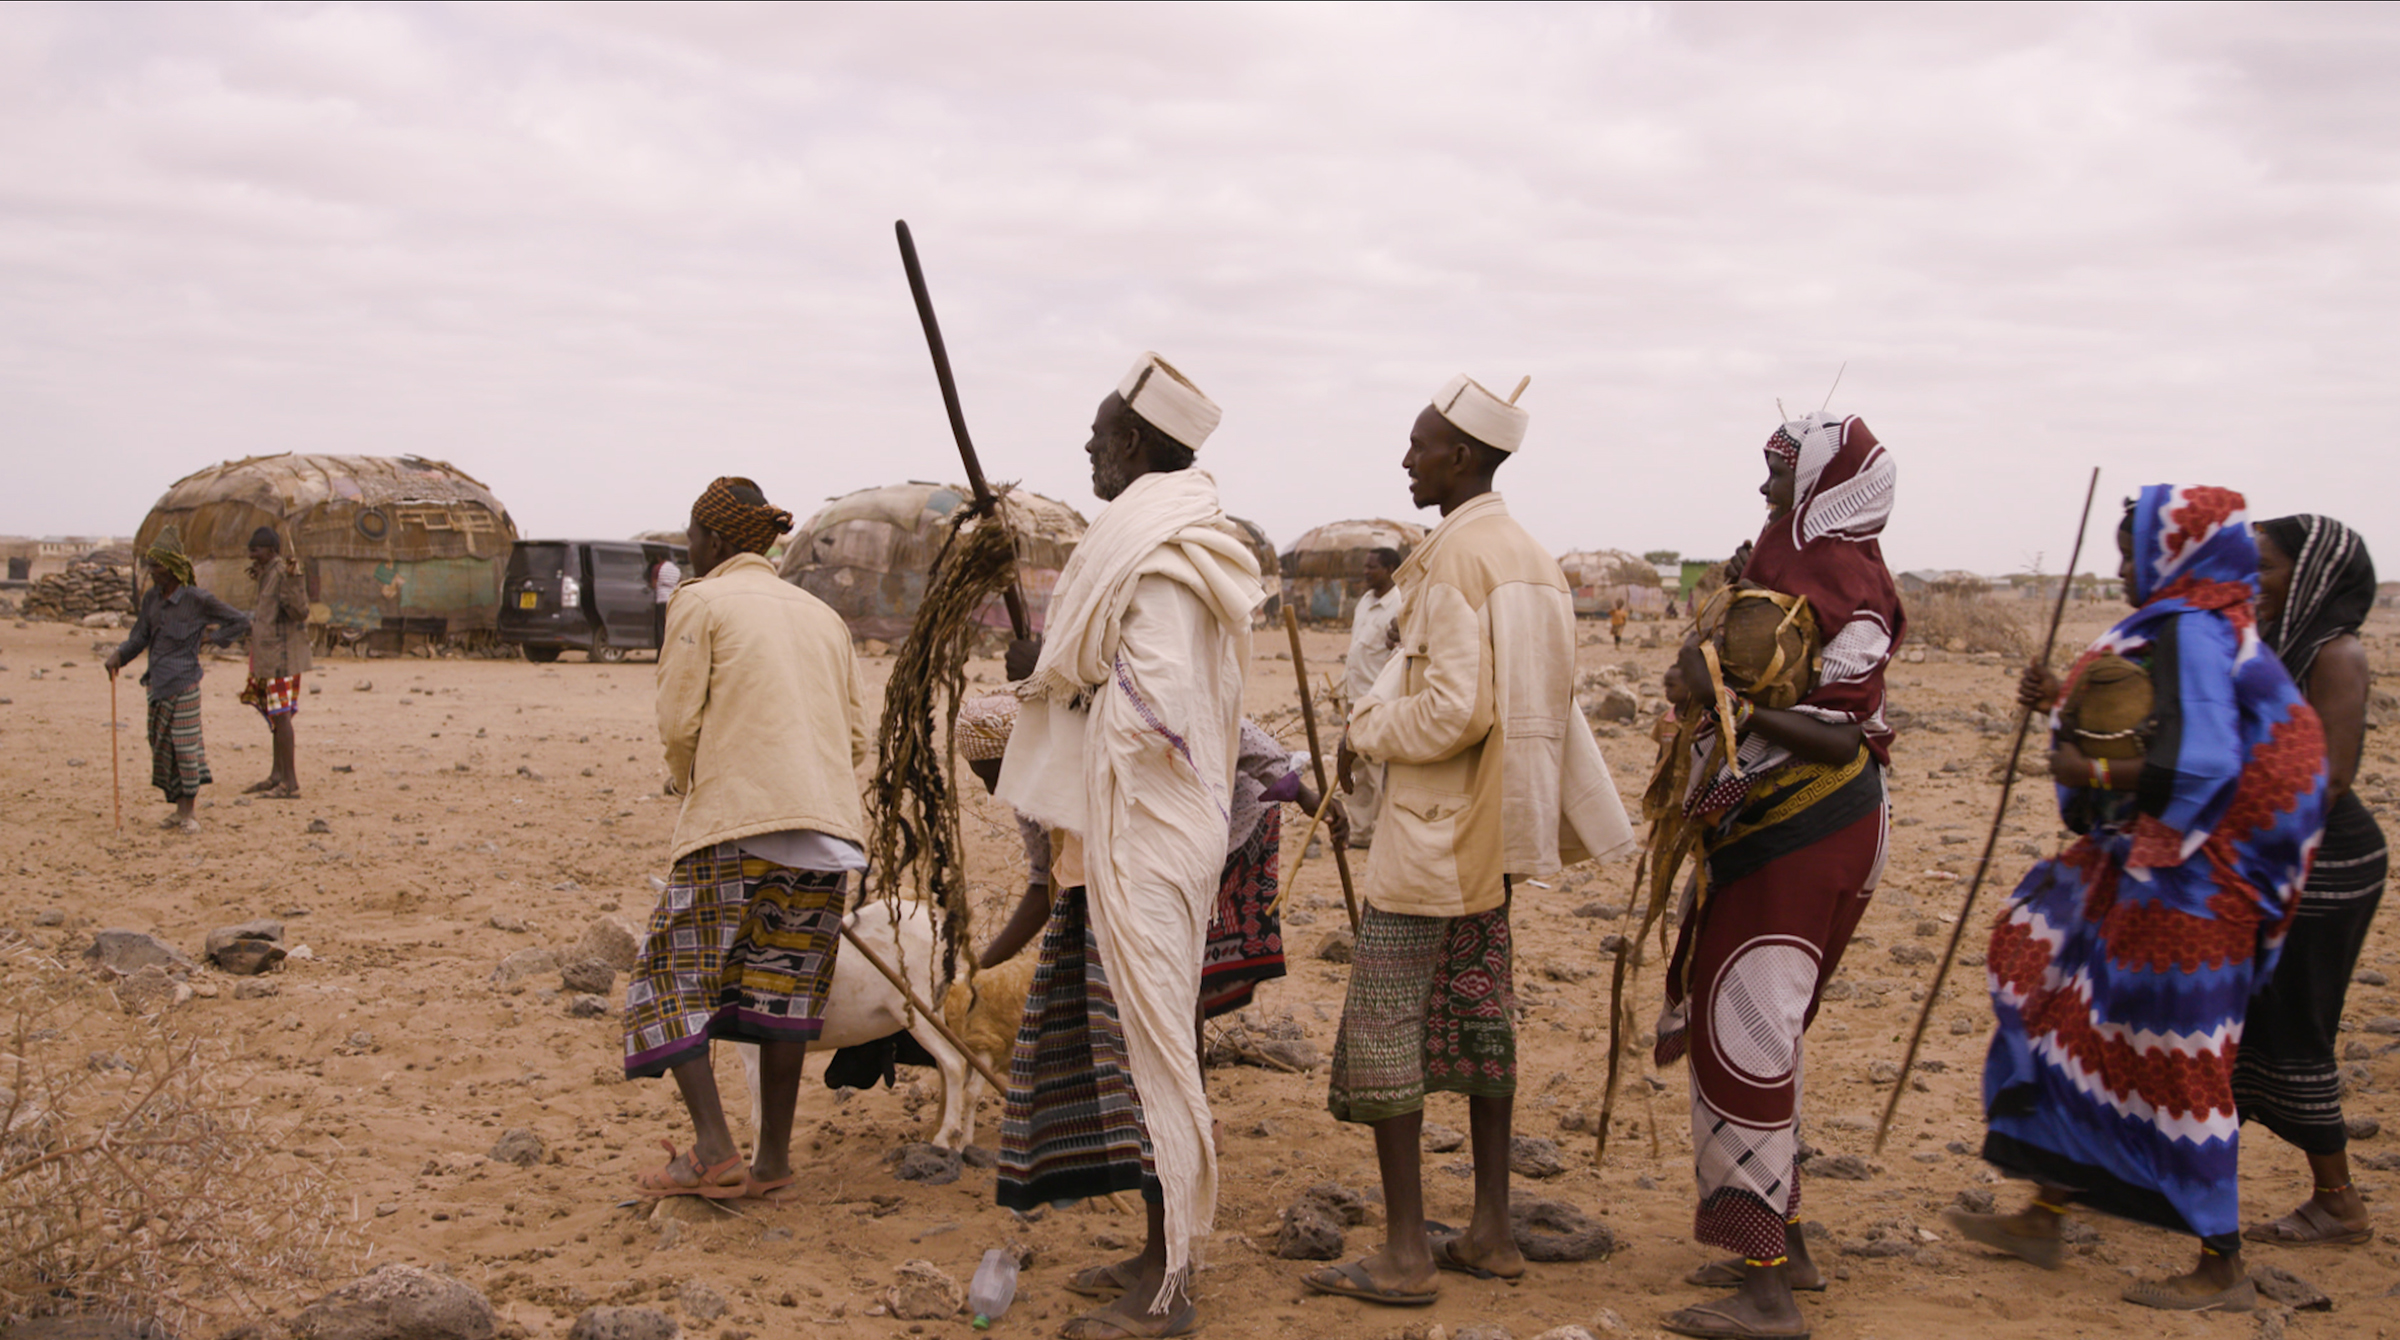 This frame grab from a video taken for TIME on 14 March 2020, shows men with the gifts on the day before the weddin. The groom's family presents gifts to the bride's father, including a dowry of three camels, a moila camel packed with gifts. There are also gifts to the bride’s family that include milk, tobacco and coffee beans.